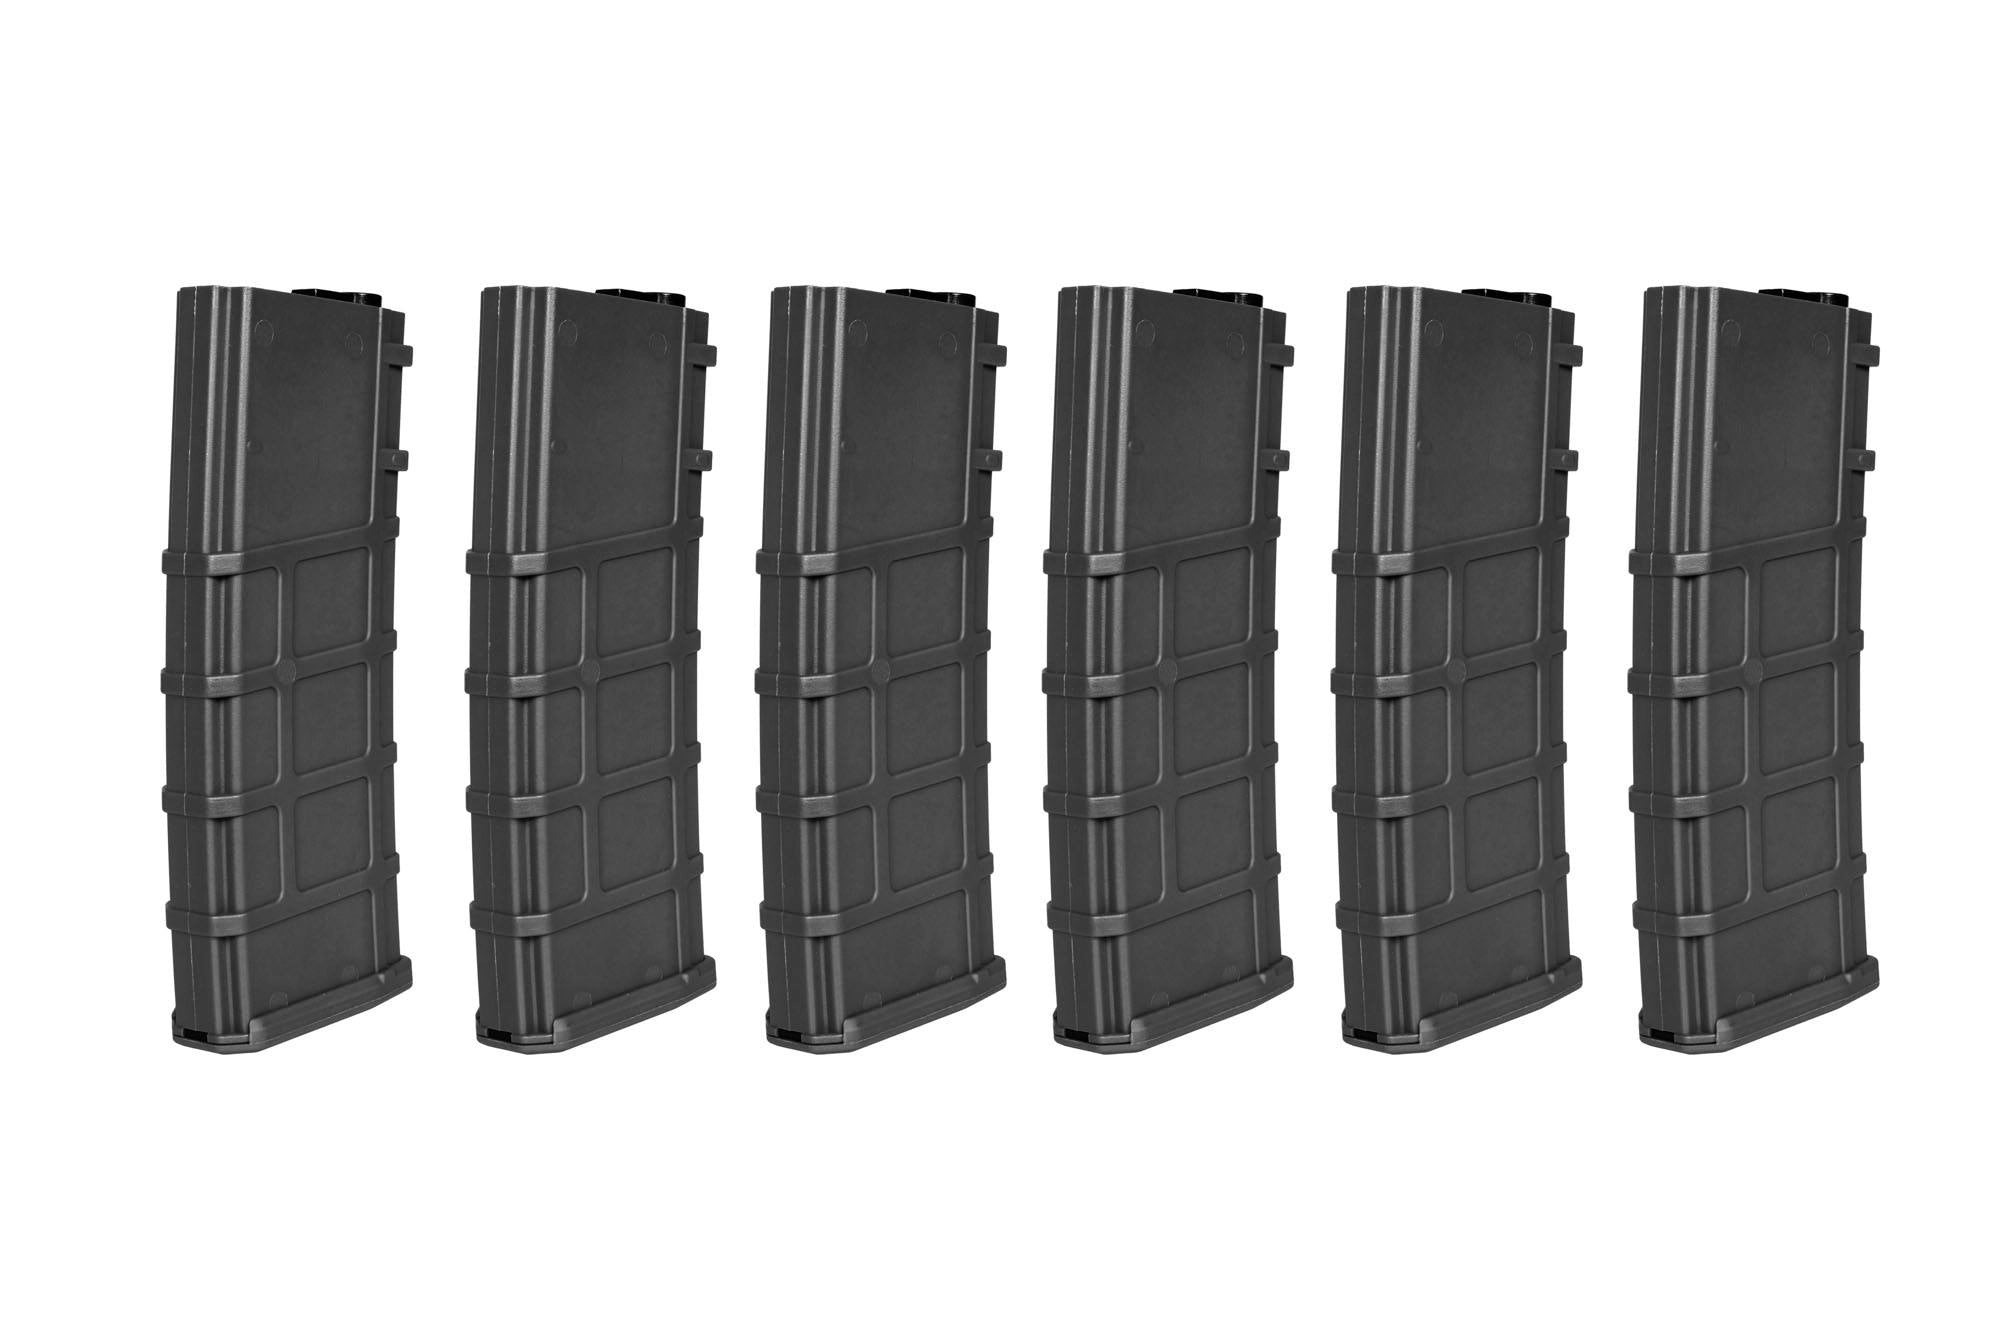 Set of 6 Polymer 30 BB's Real-Cap magazines for M4/M16 replicas - Black-1